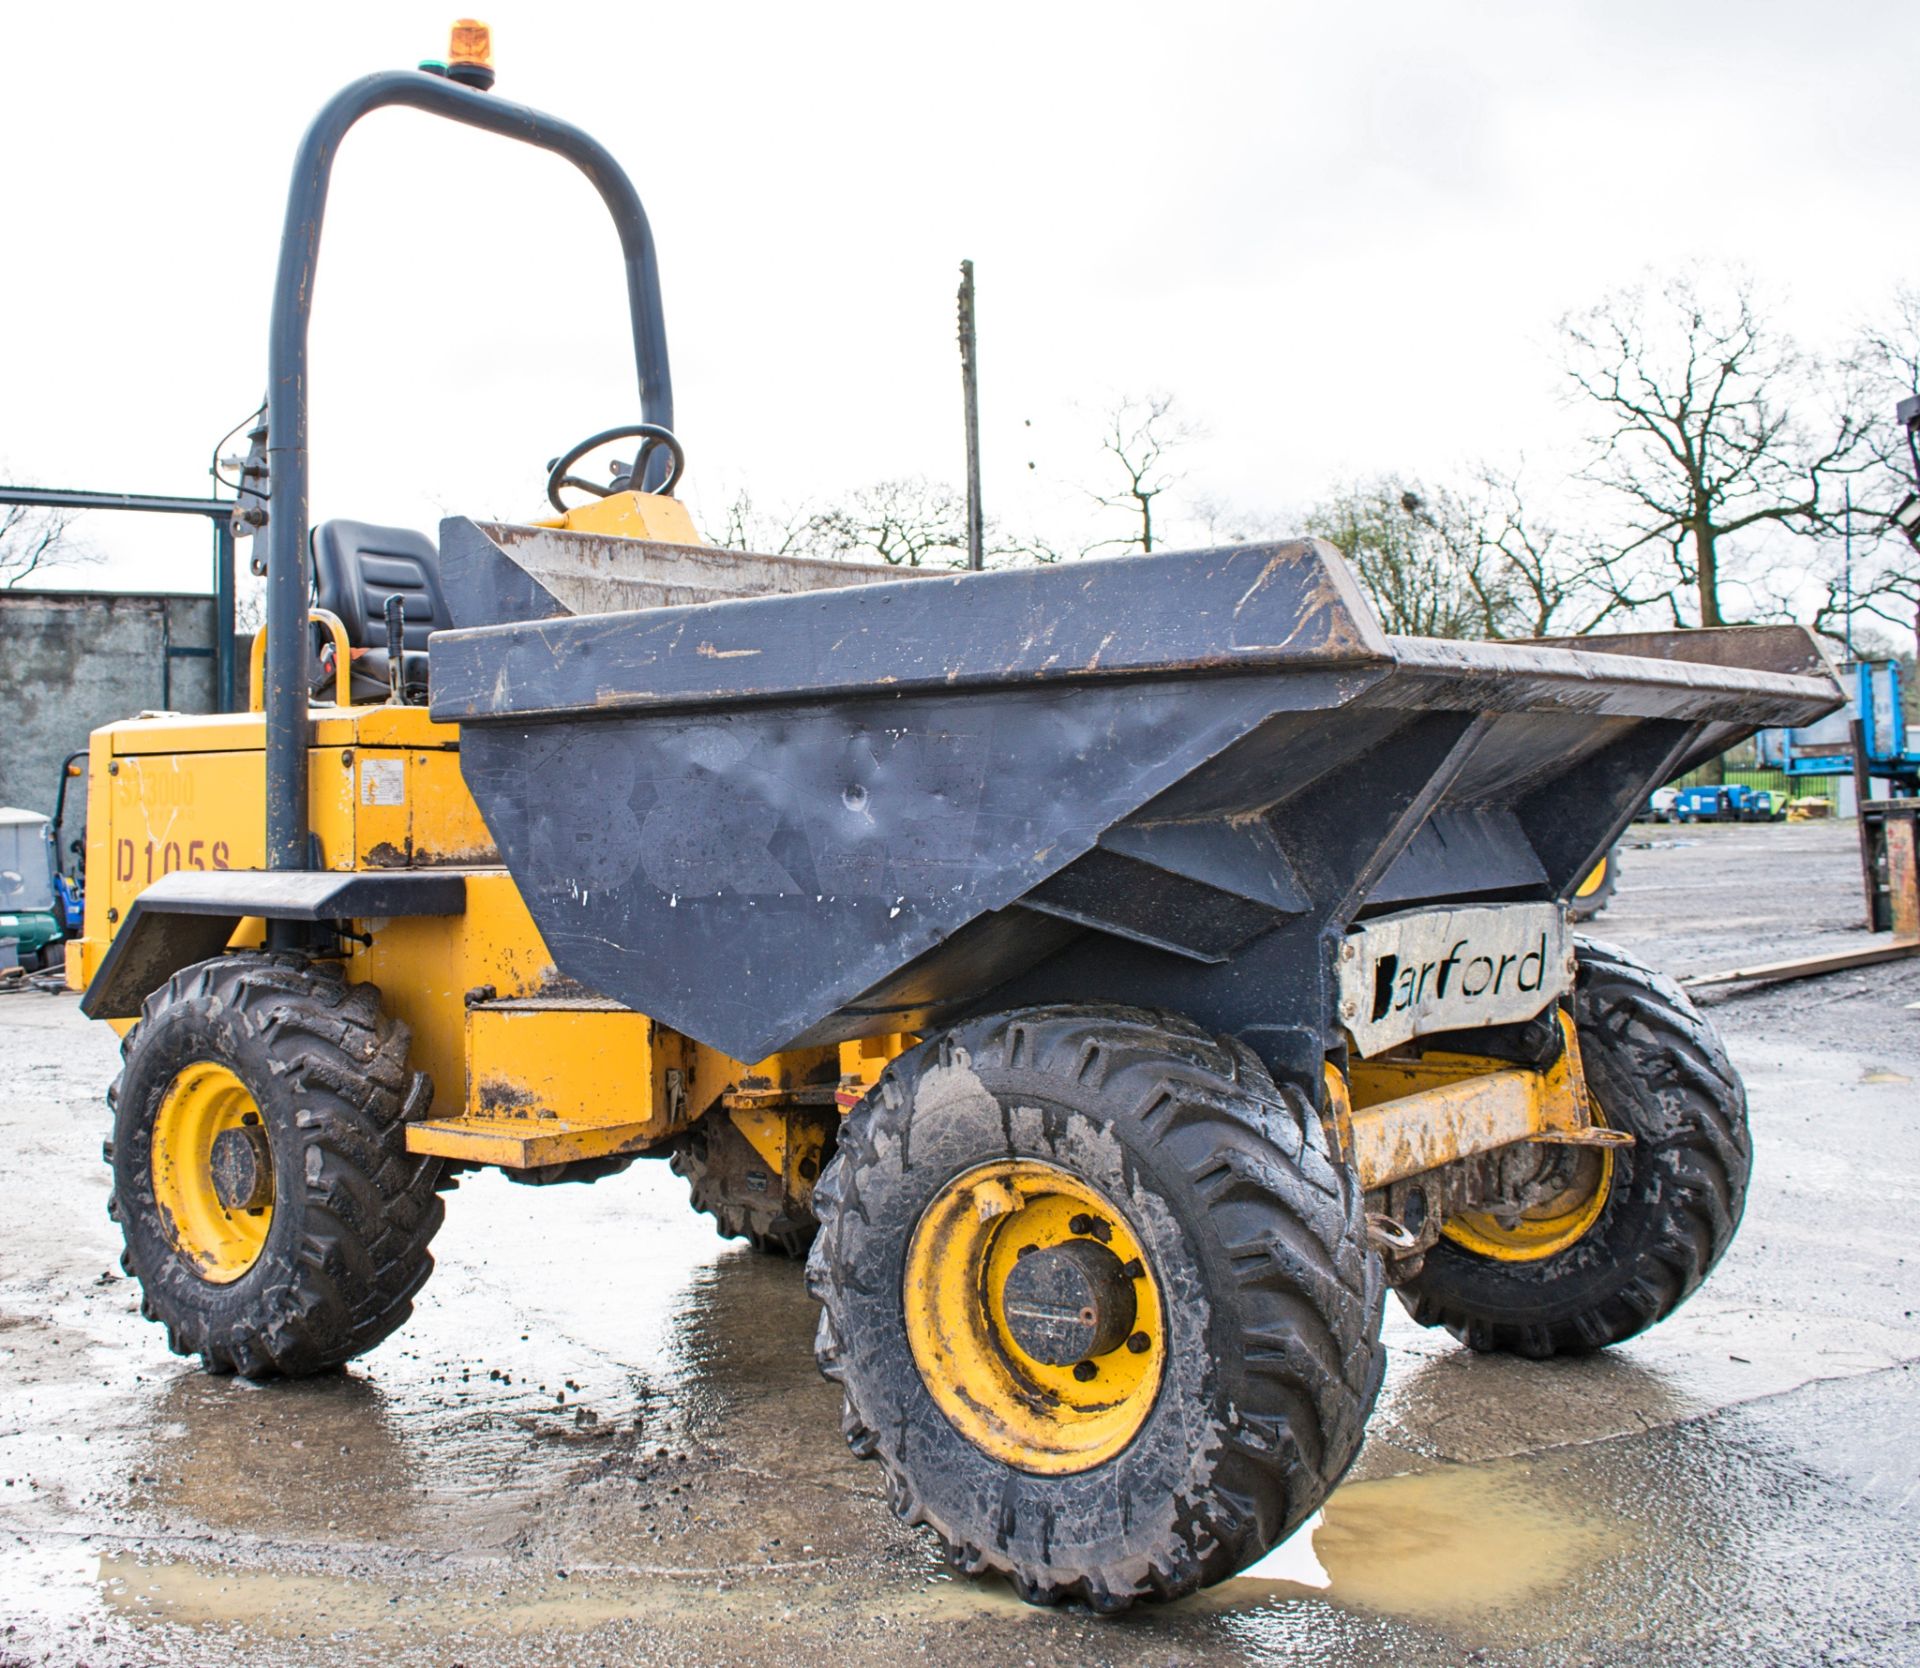 Barford 3 tonne straight skip dumper Year: 2007 S/N: SBVE0848 Recorded Hours: Not displayed (Clock - Image 2 of 13